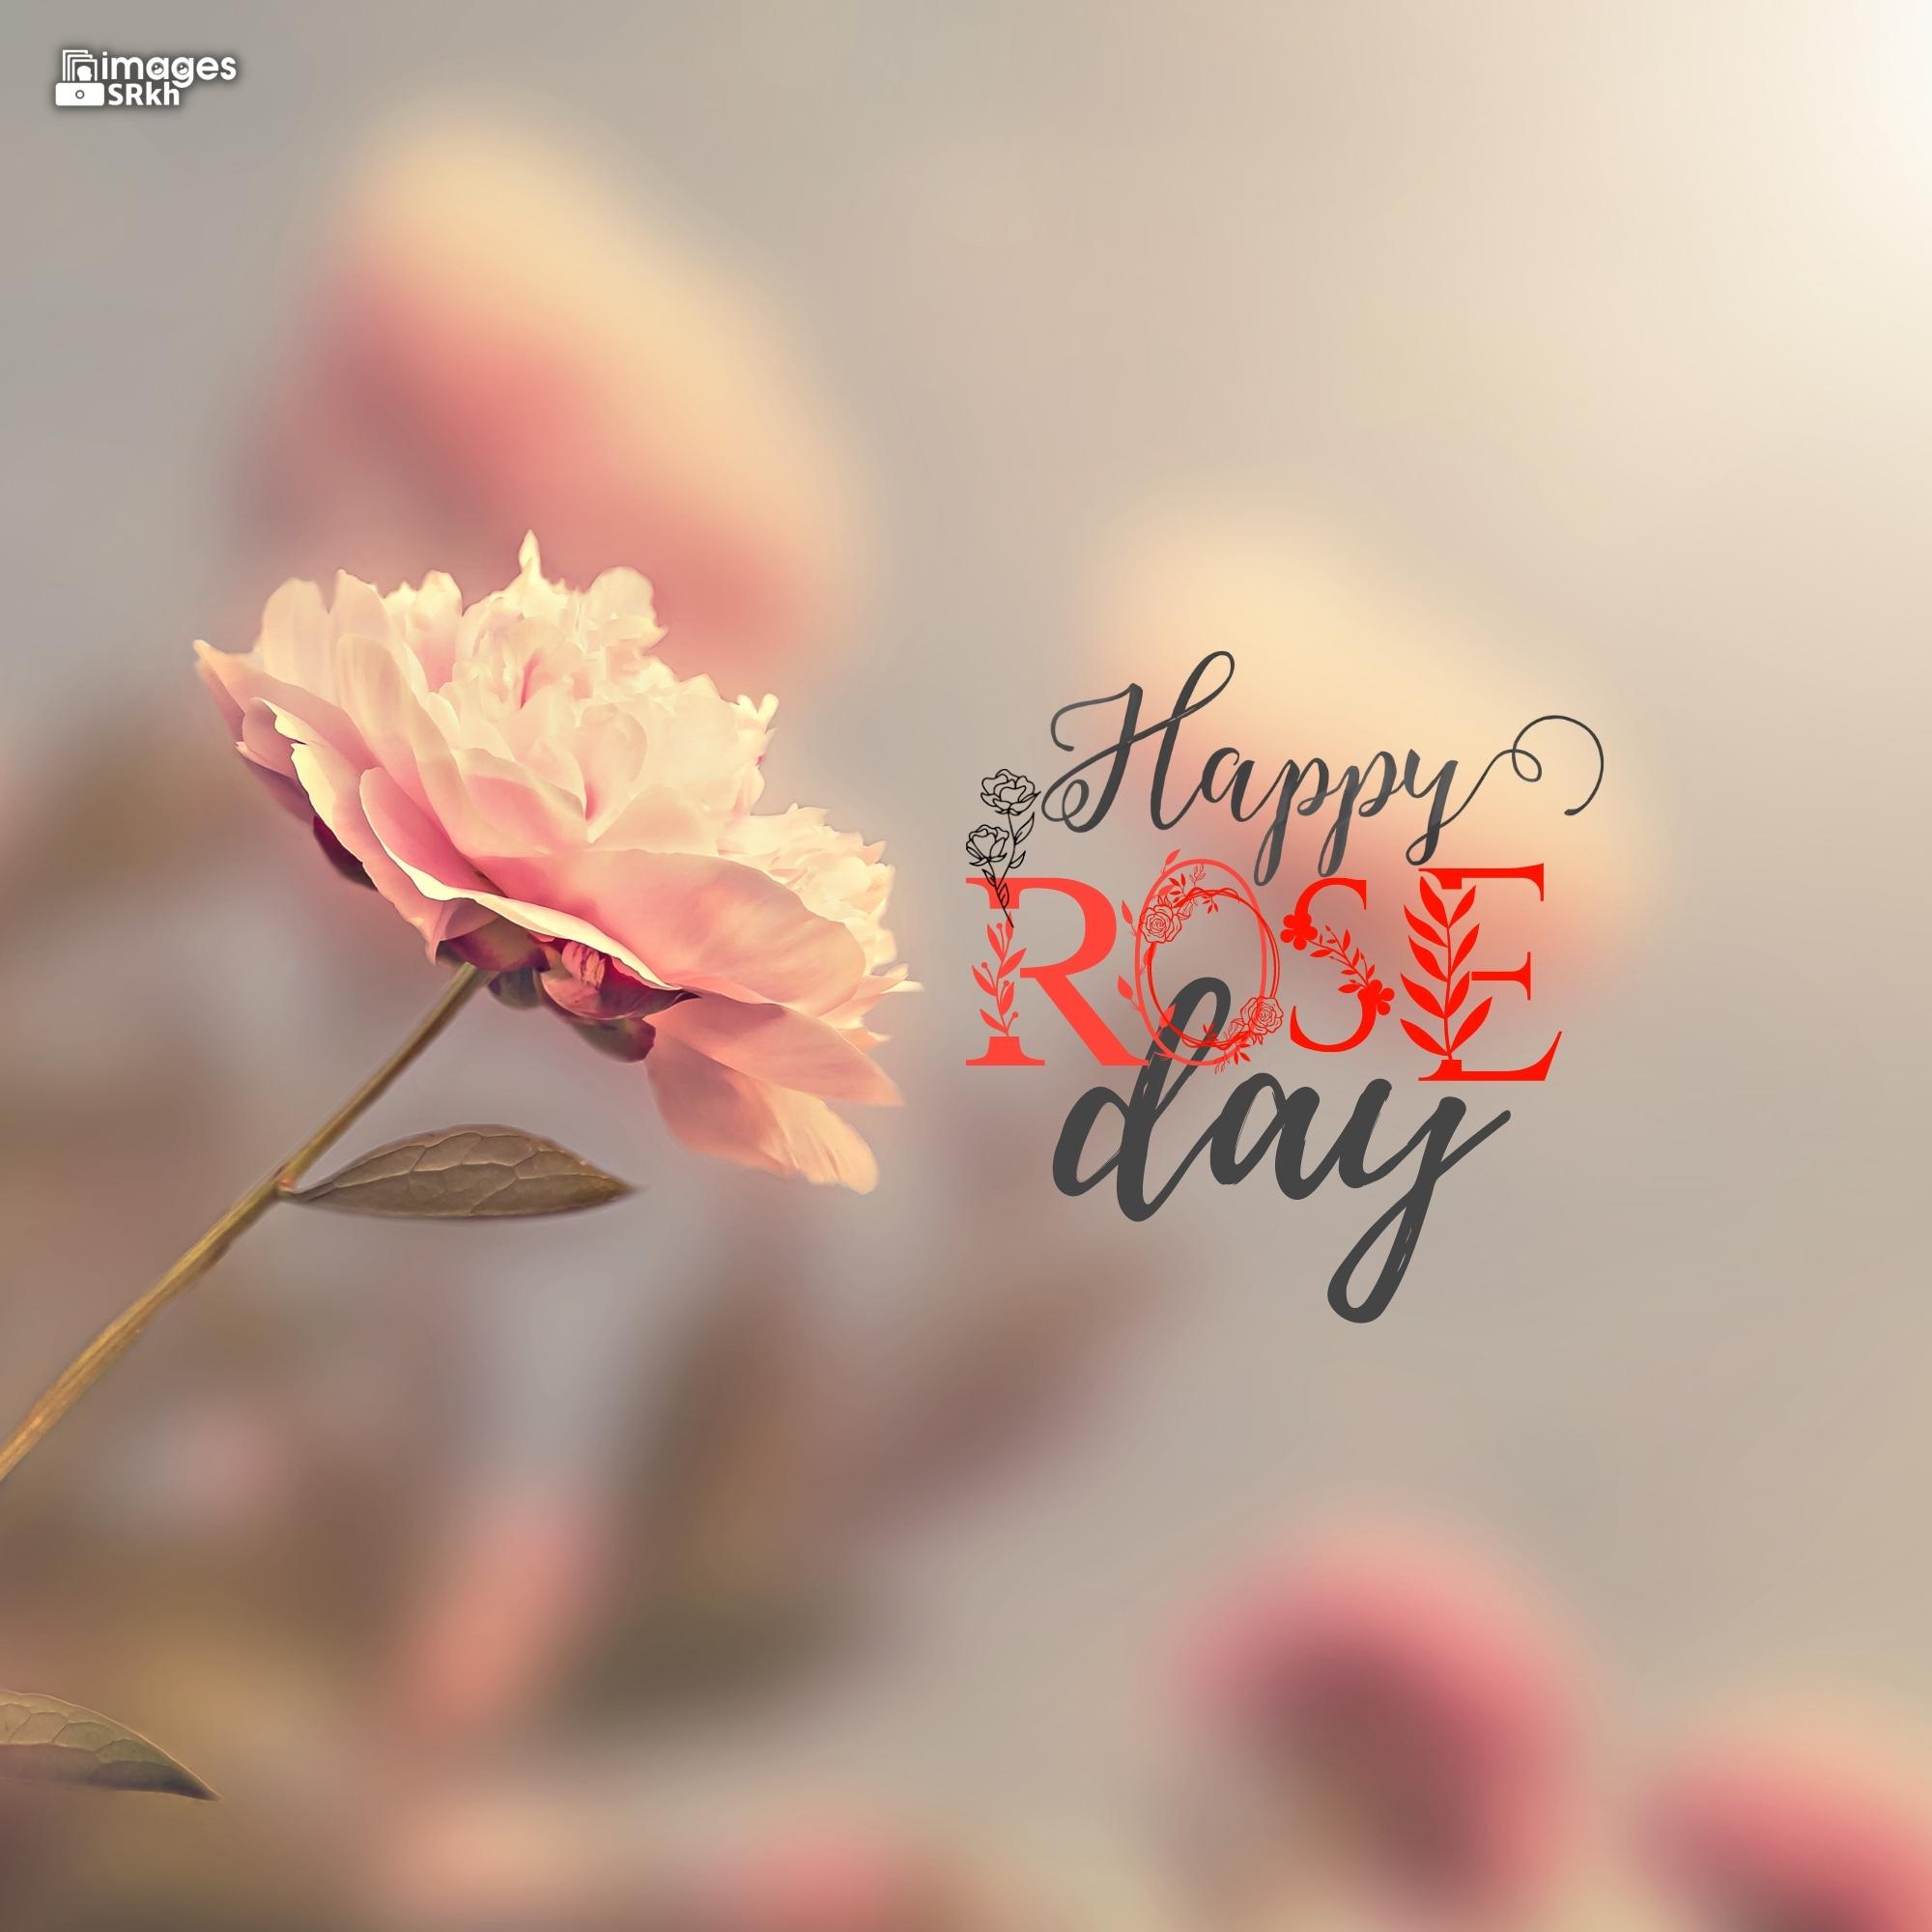 Happy Rose Day Image Hd Download (19)